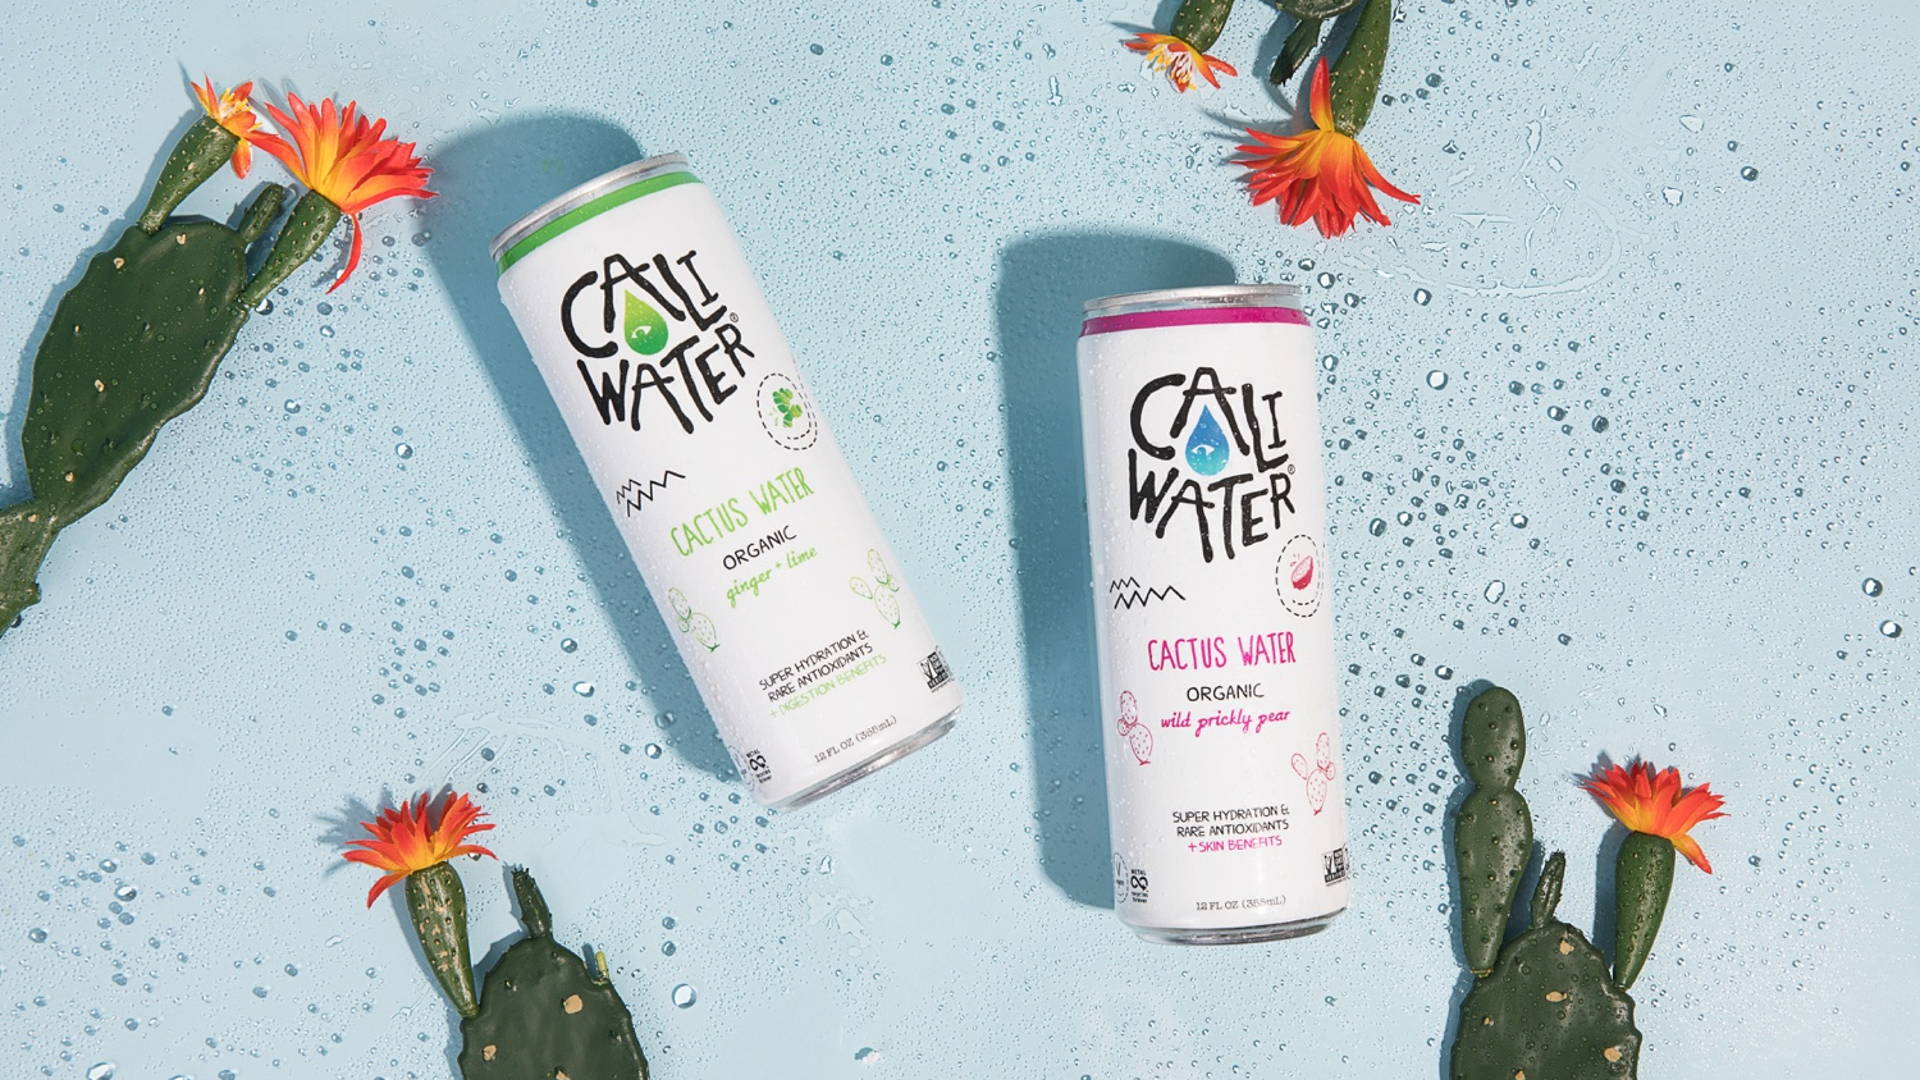 Featured image for Cali-Based Beverage Brand Caliwater Relaunches